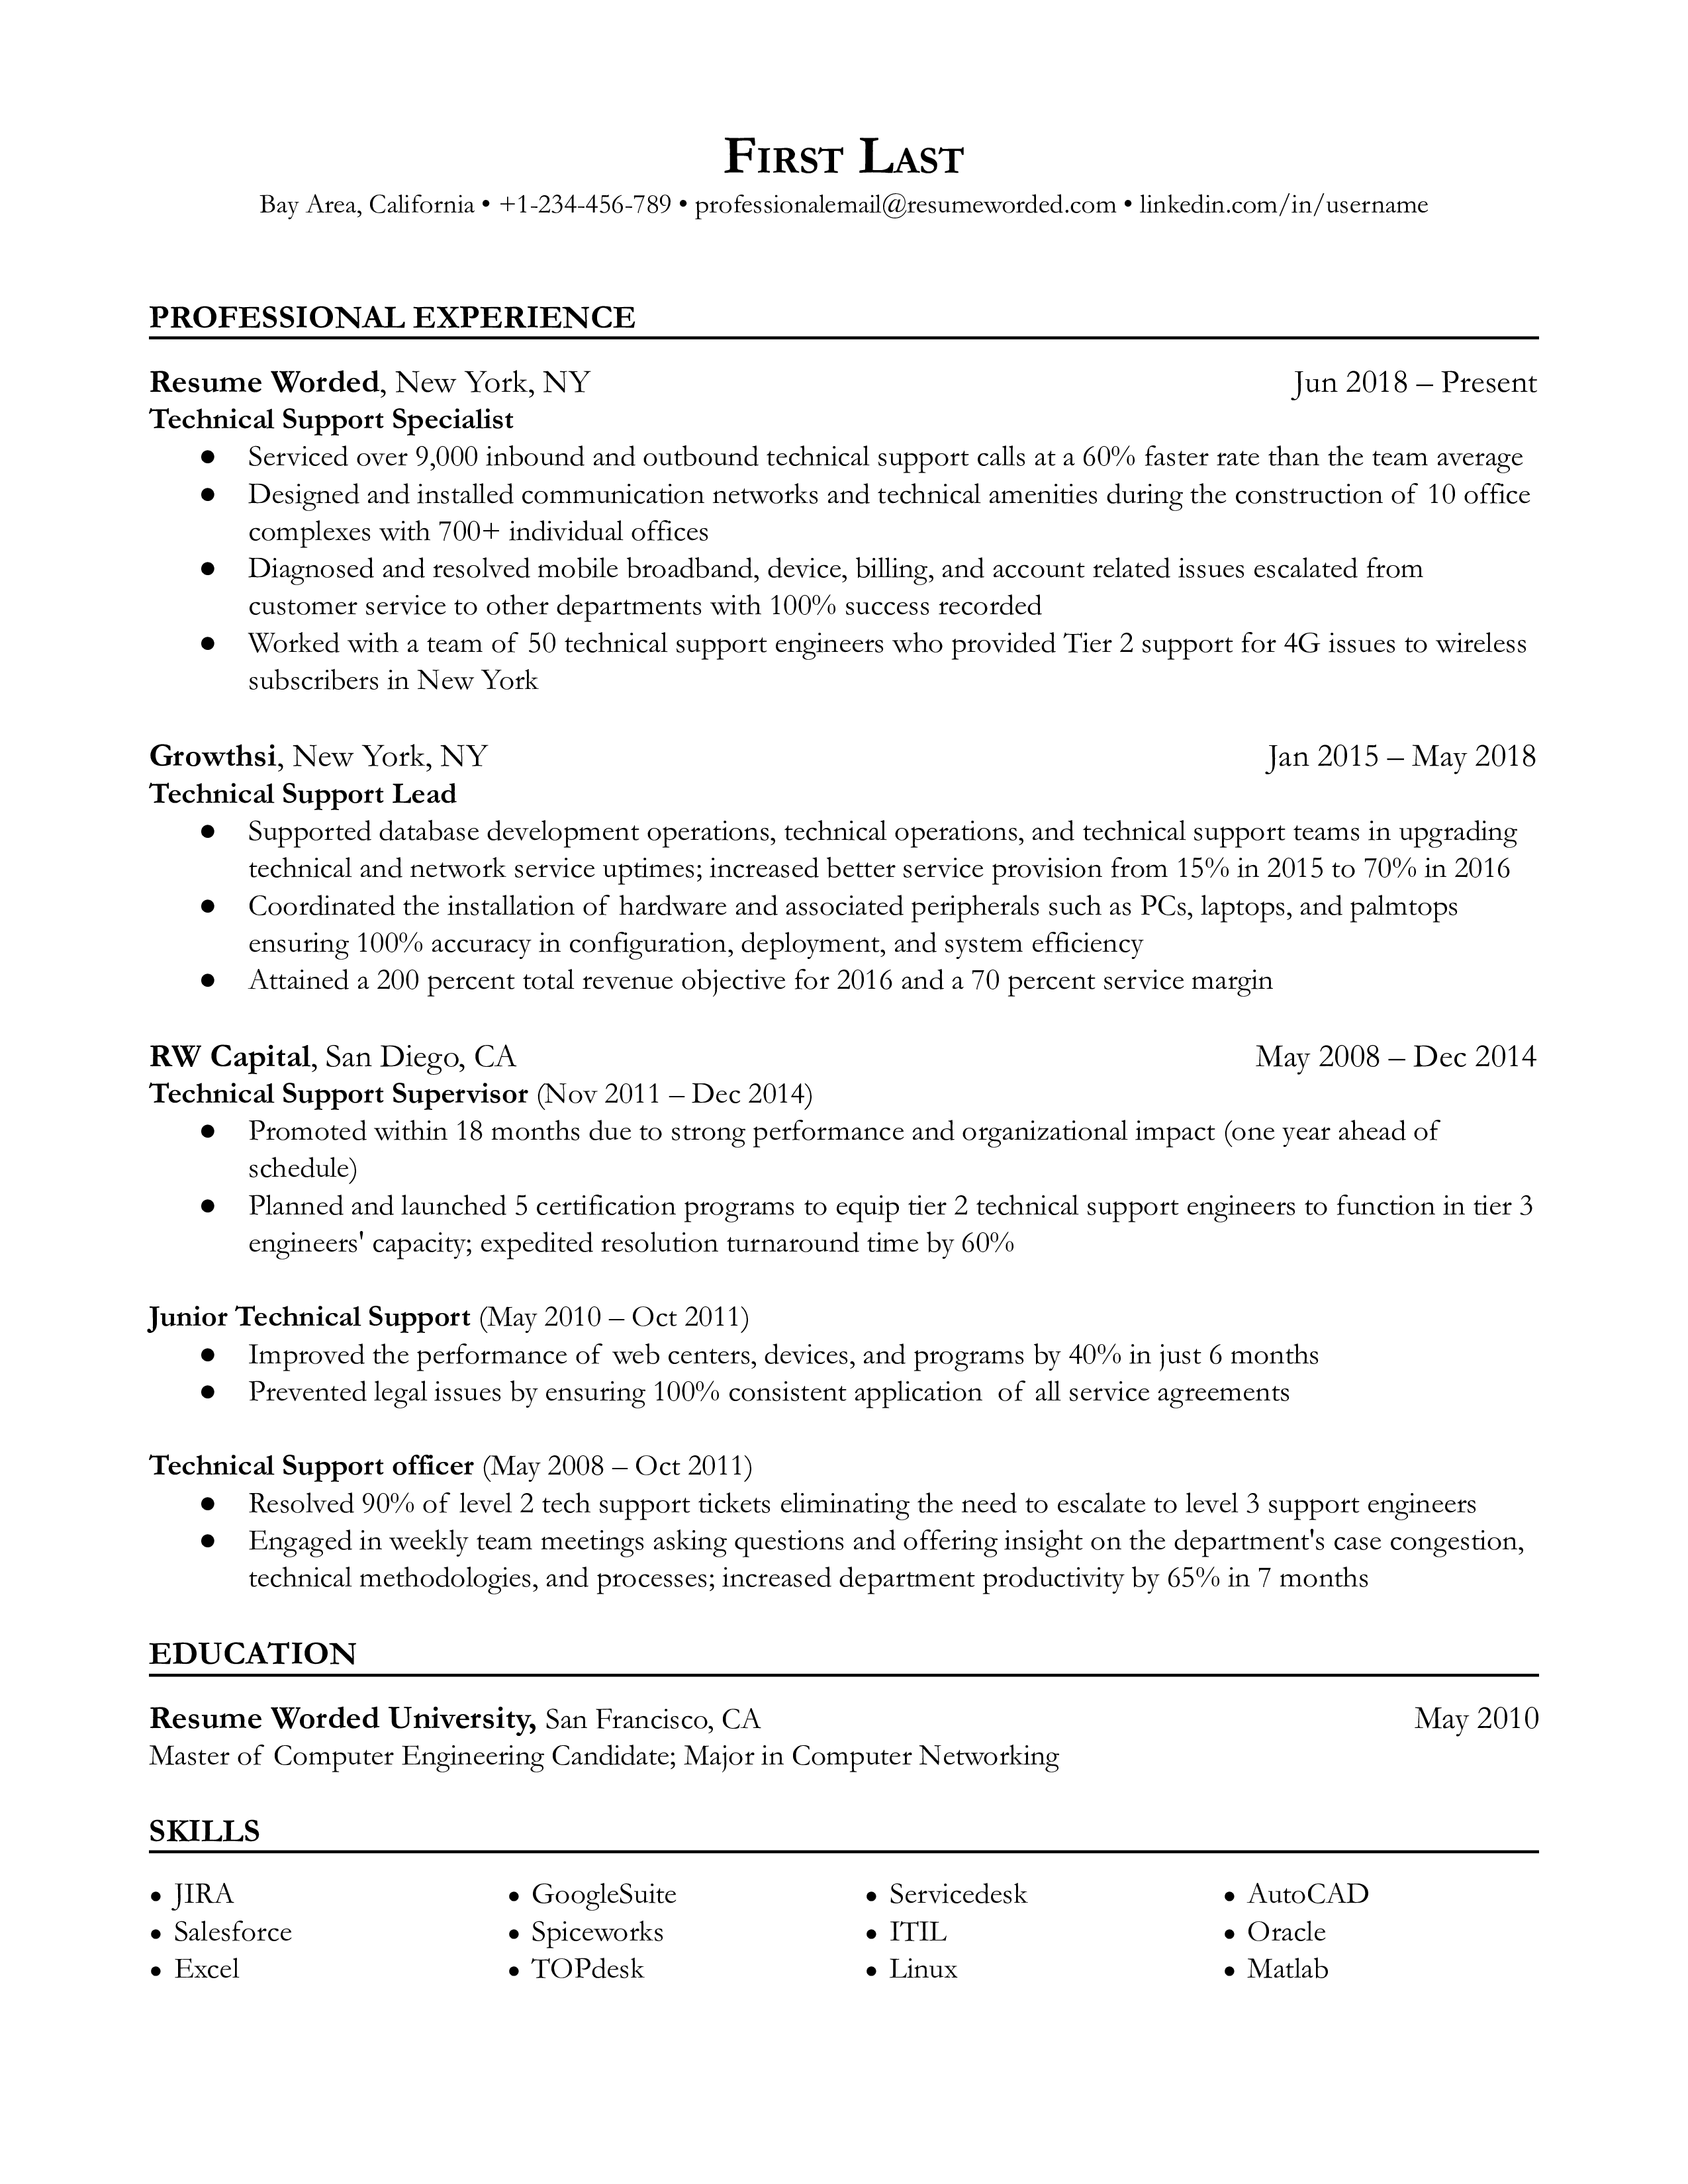 A well-structured resume for the position of a Technical Support Specialist.